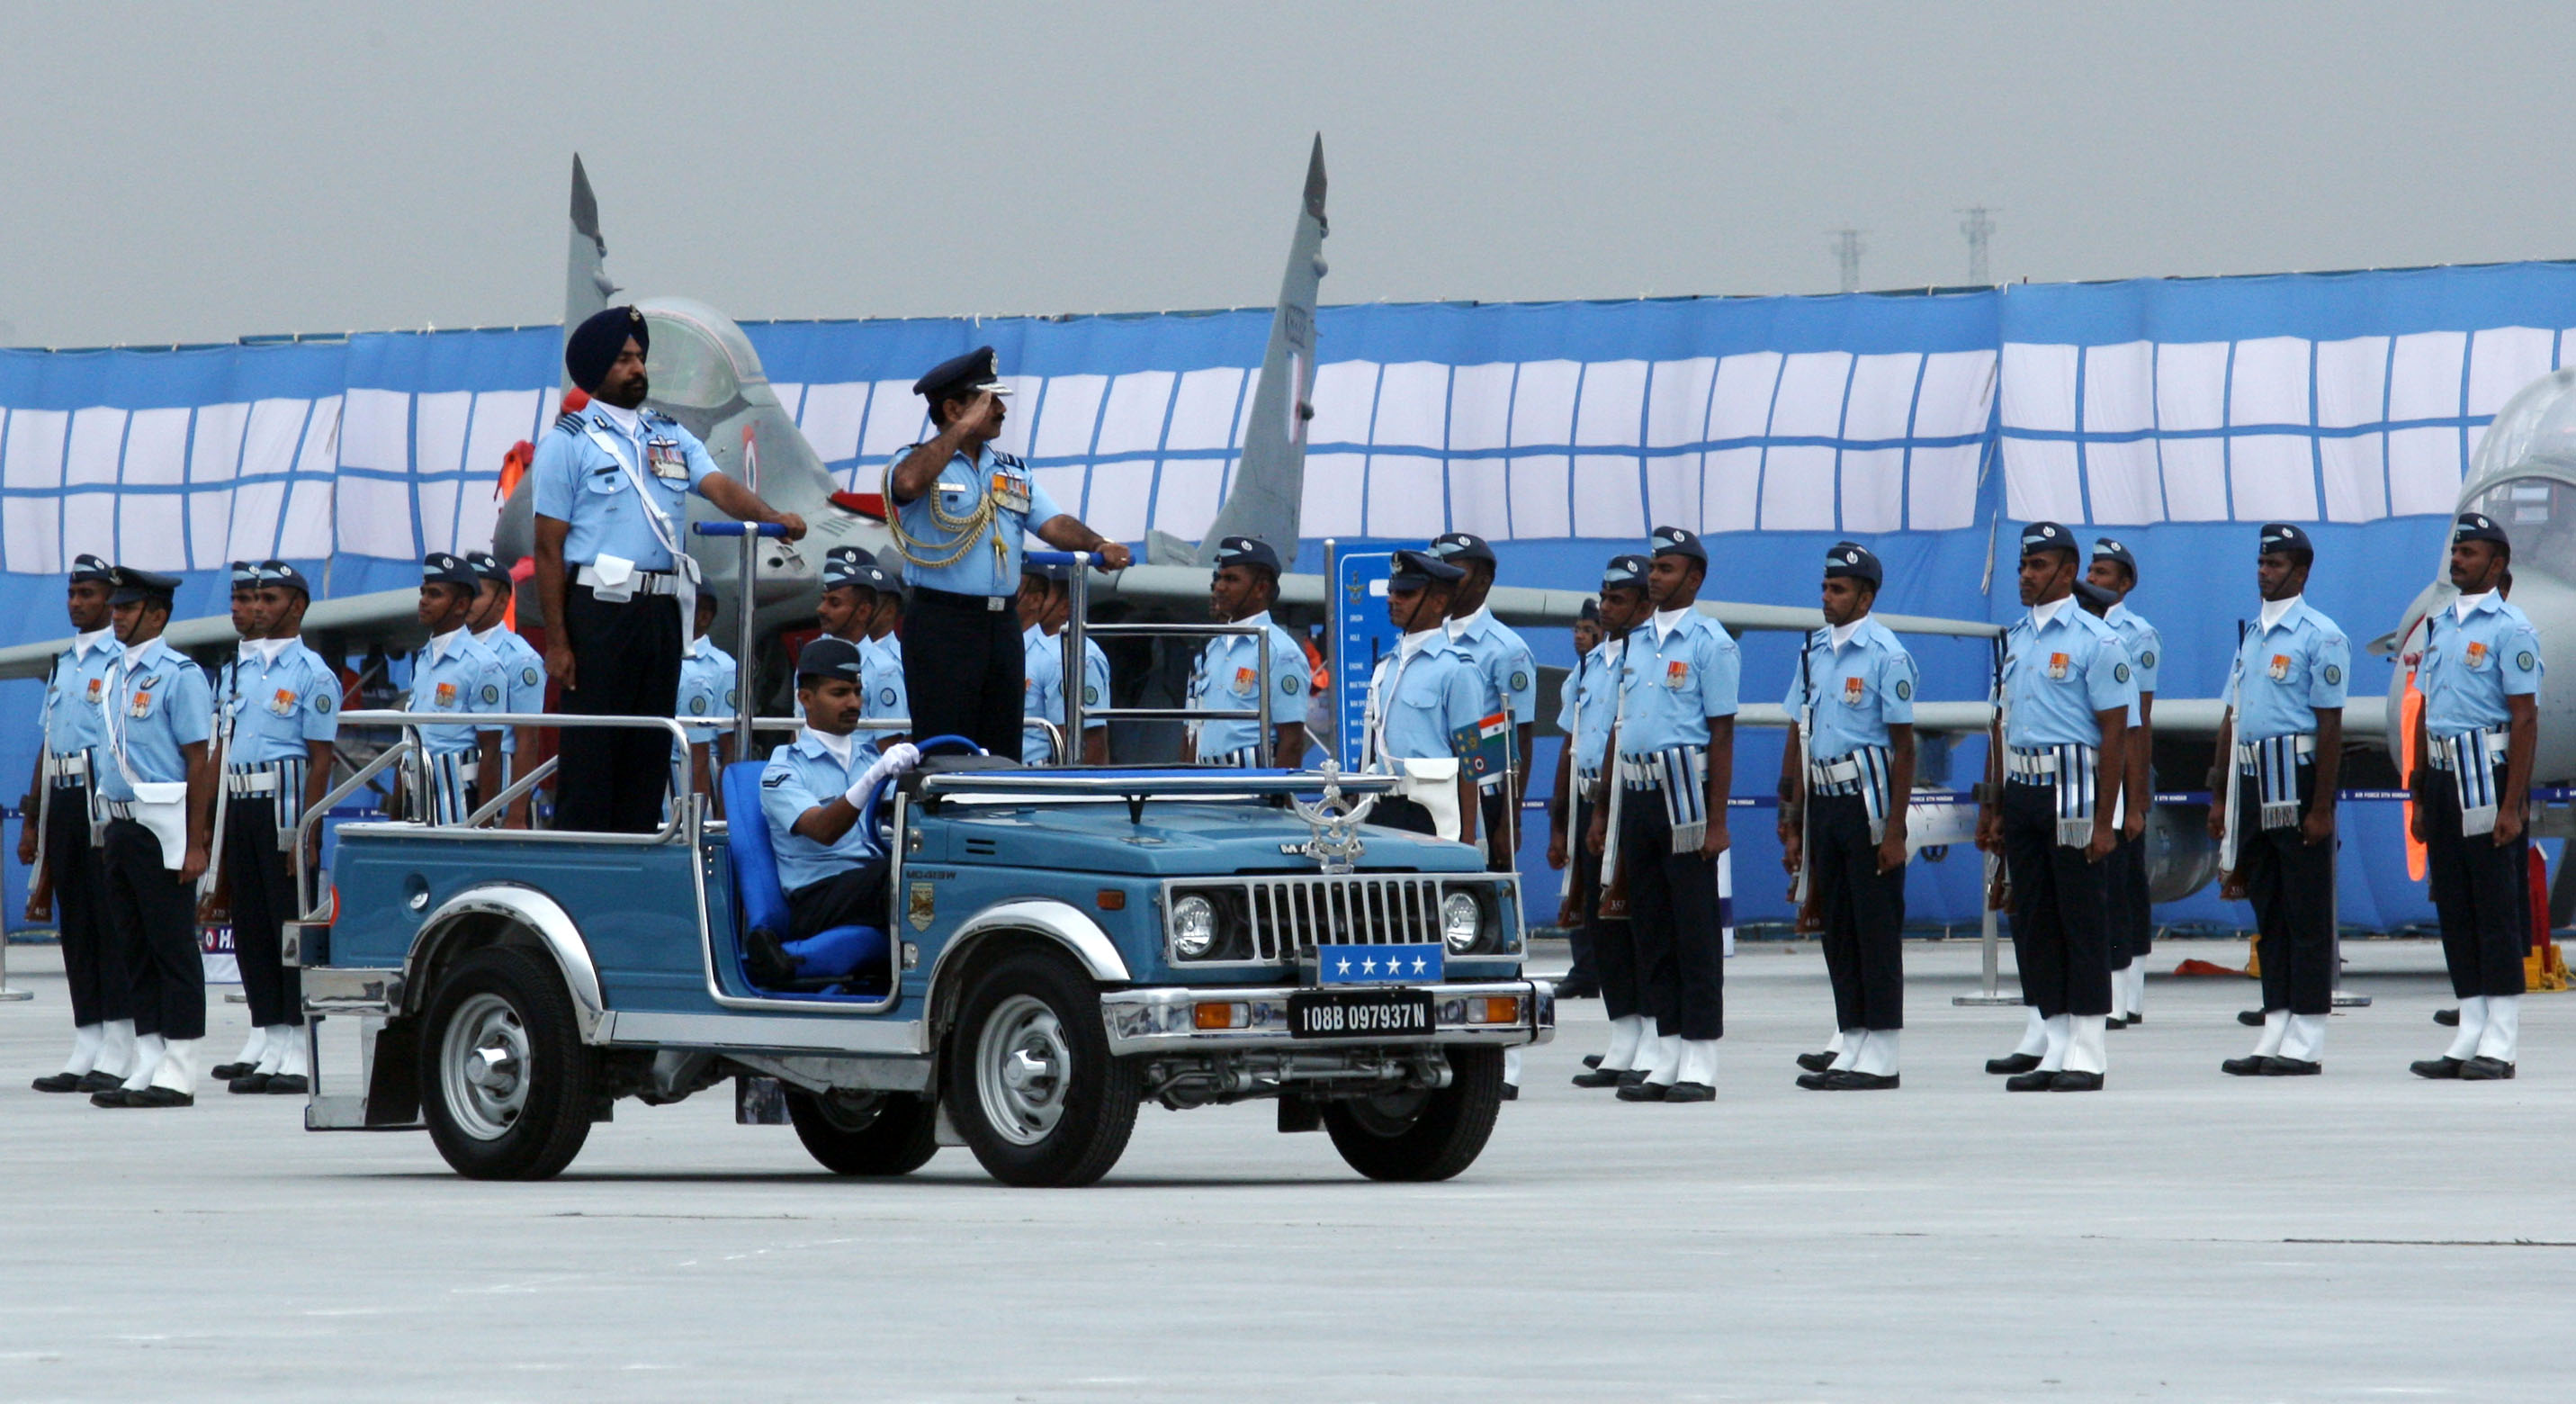 Glimpses-of-Indian-Air-Force-Day-2014-PHOTO-3.jpg